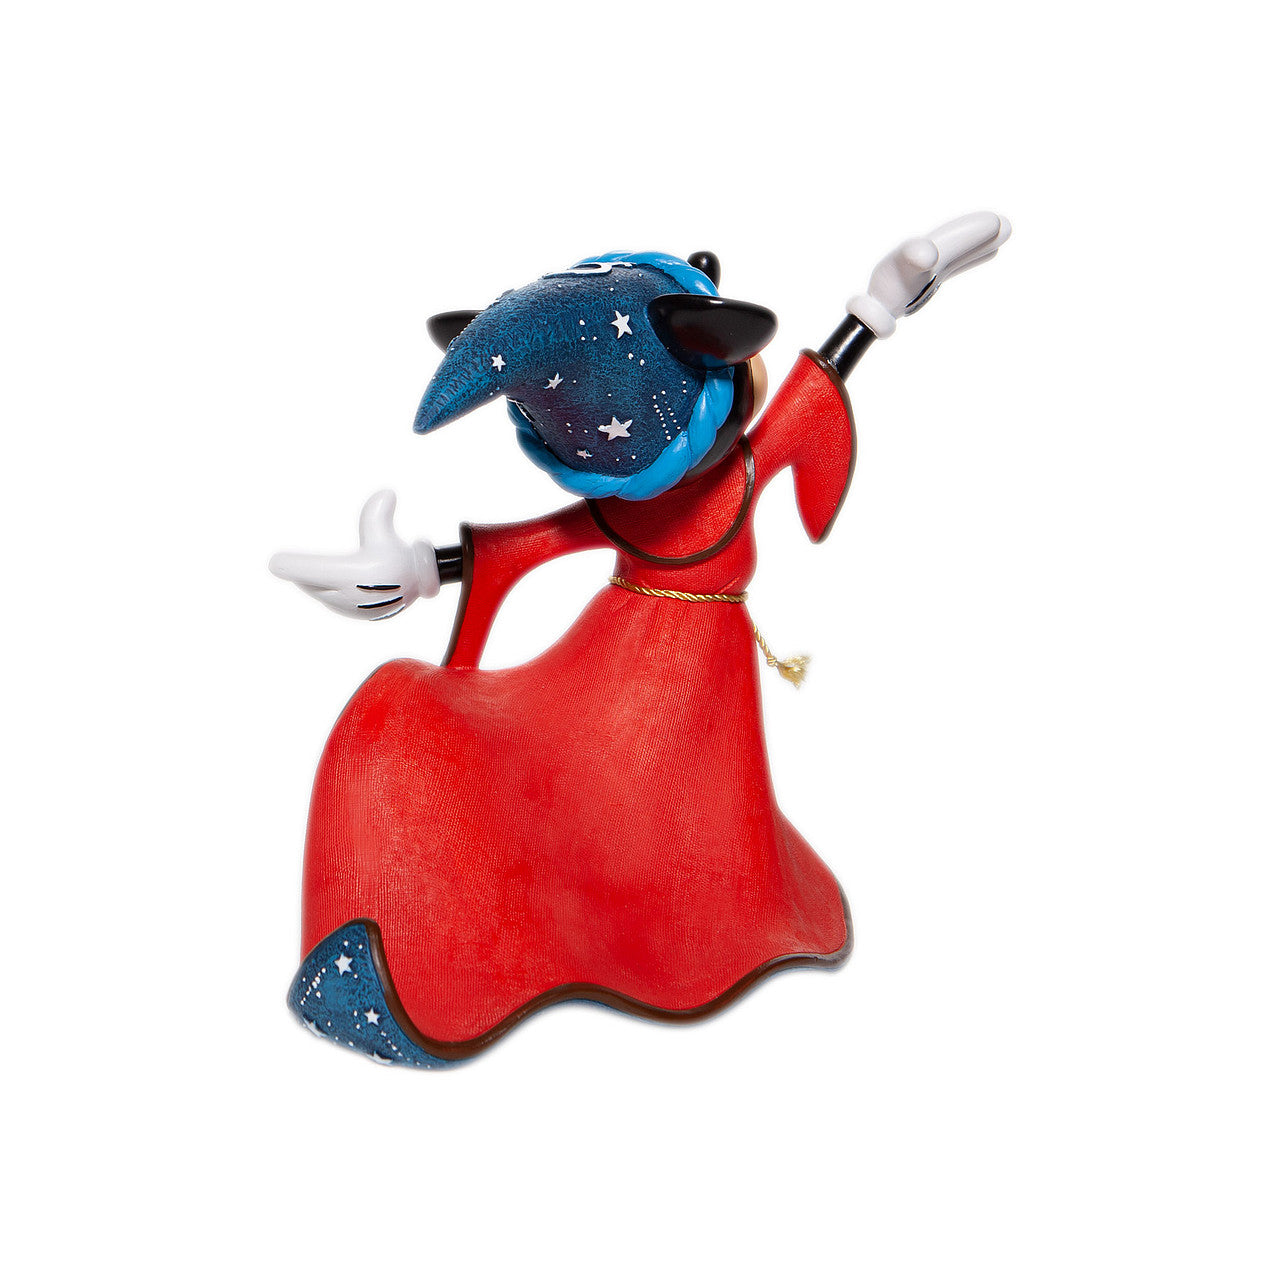 Disney Scorcerer Mickey Figurine  Celebrating the 80th Anniversary of Walt Disney's masterpiece, Fantasia, Sorcerer Mickey receives the Couture de Force treatment in this striking figurine.